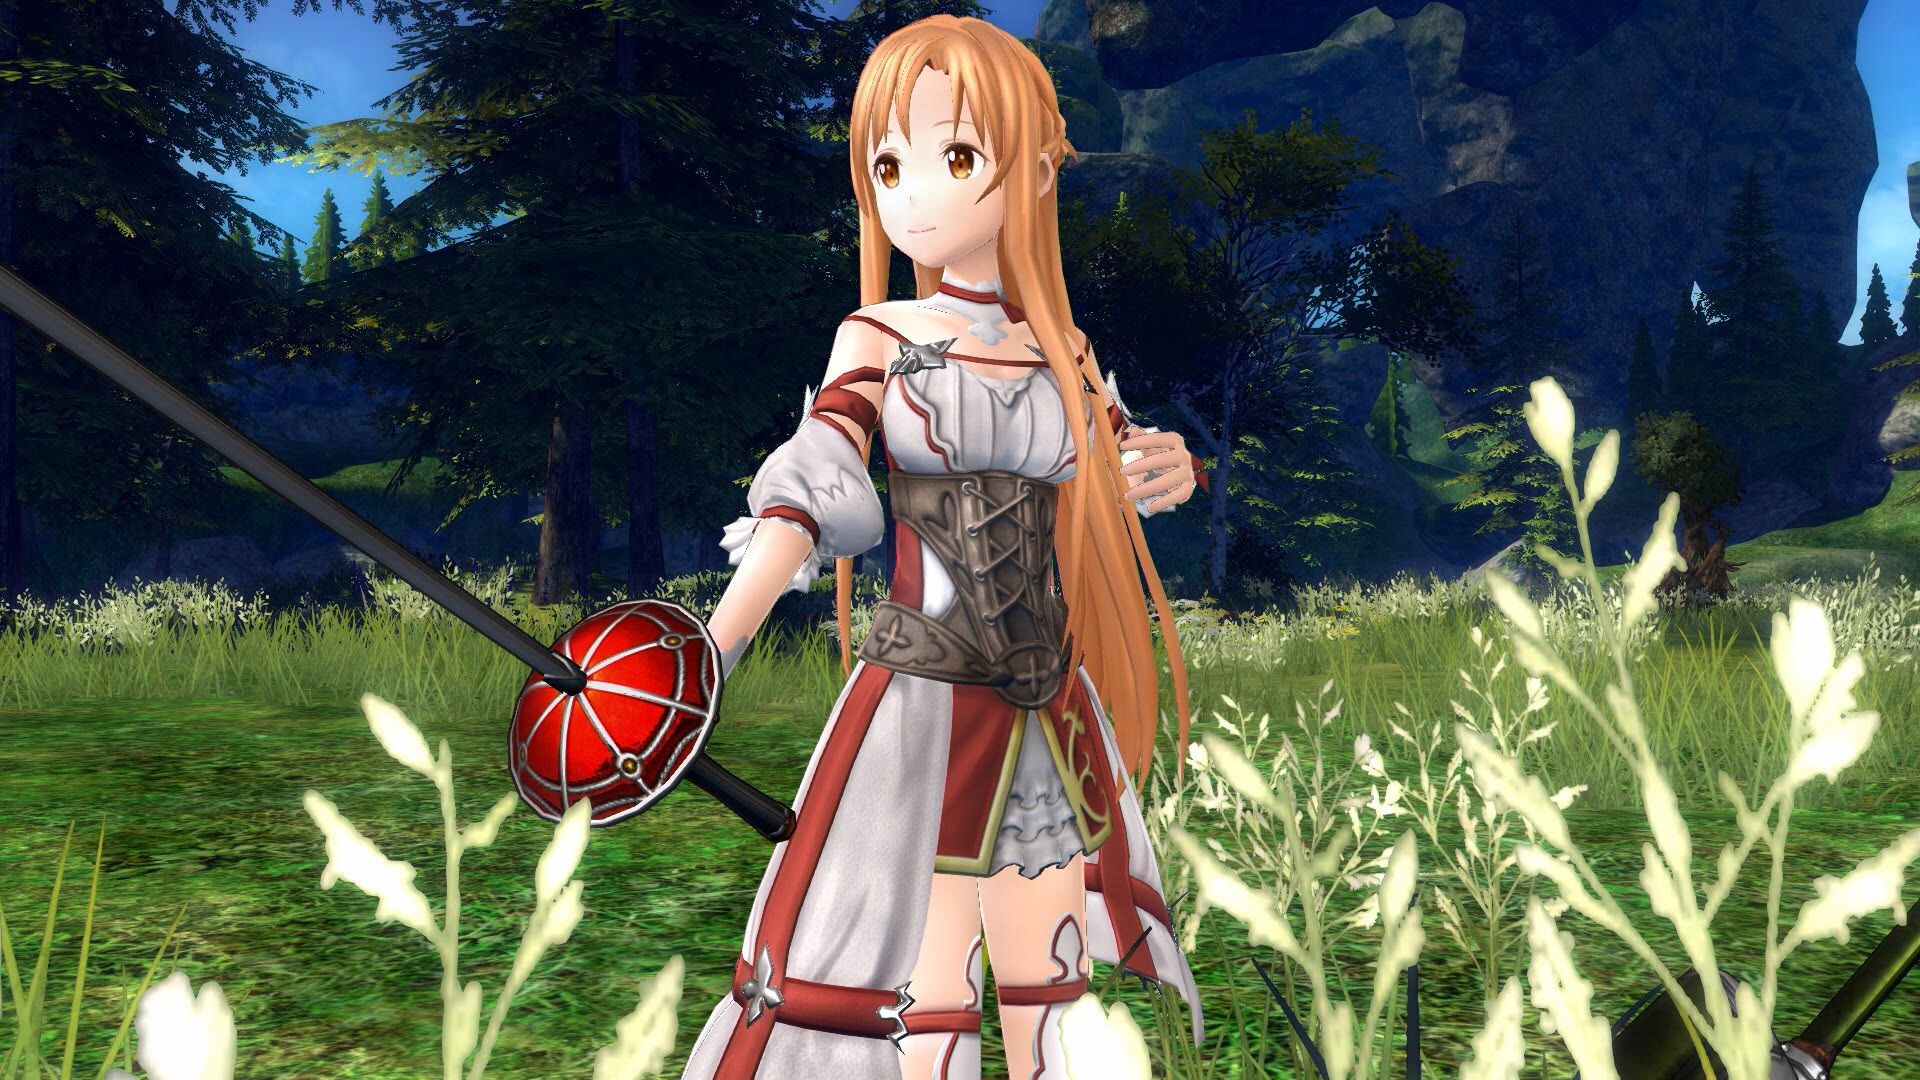 Sword Art Online: Hollow Realization Coming To North America - 2015-12-23 08:37:57